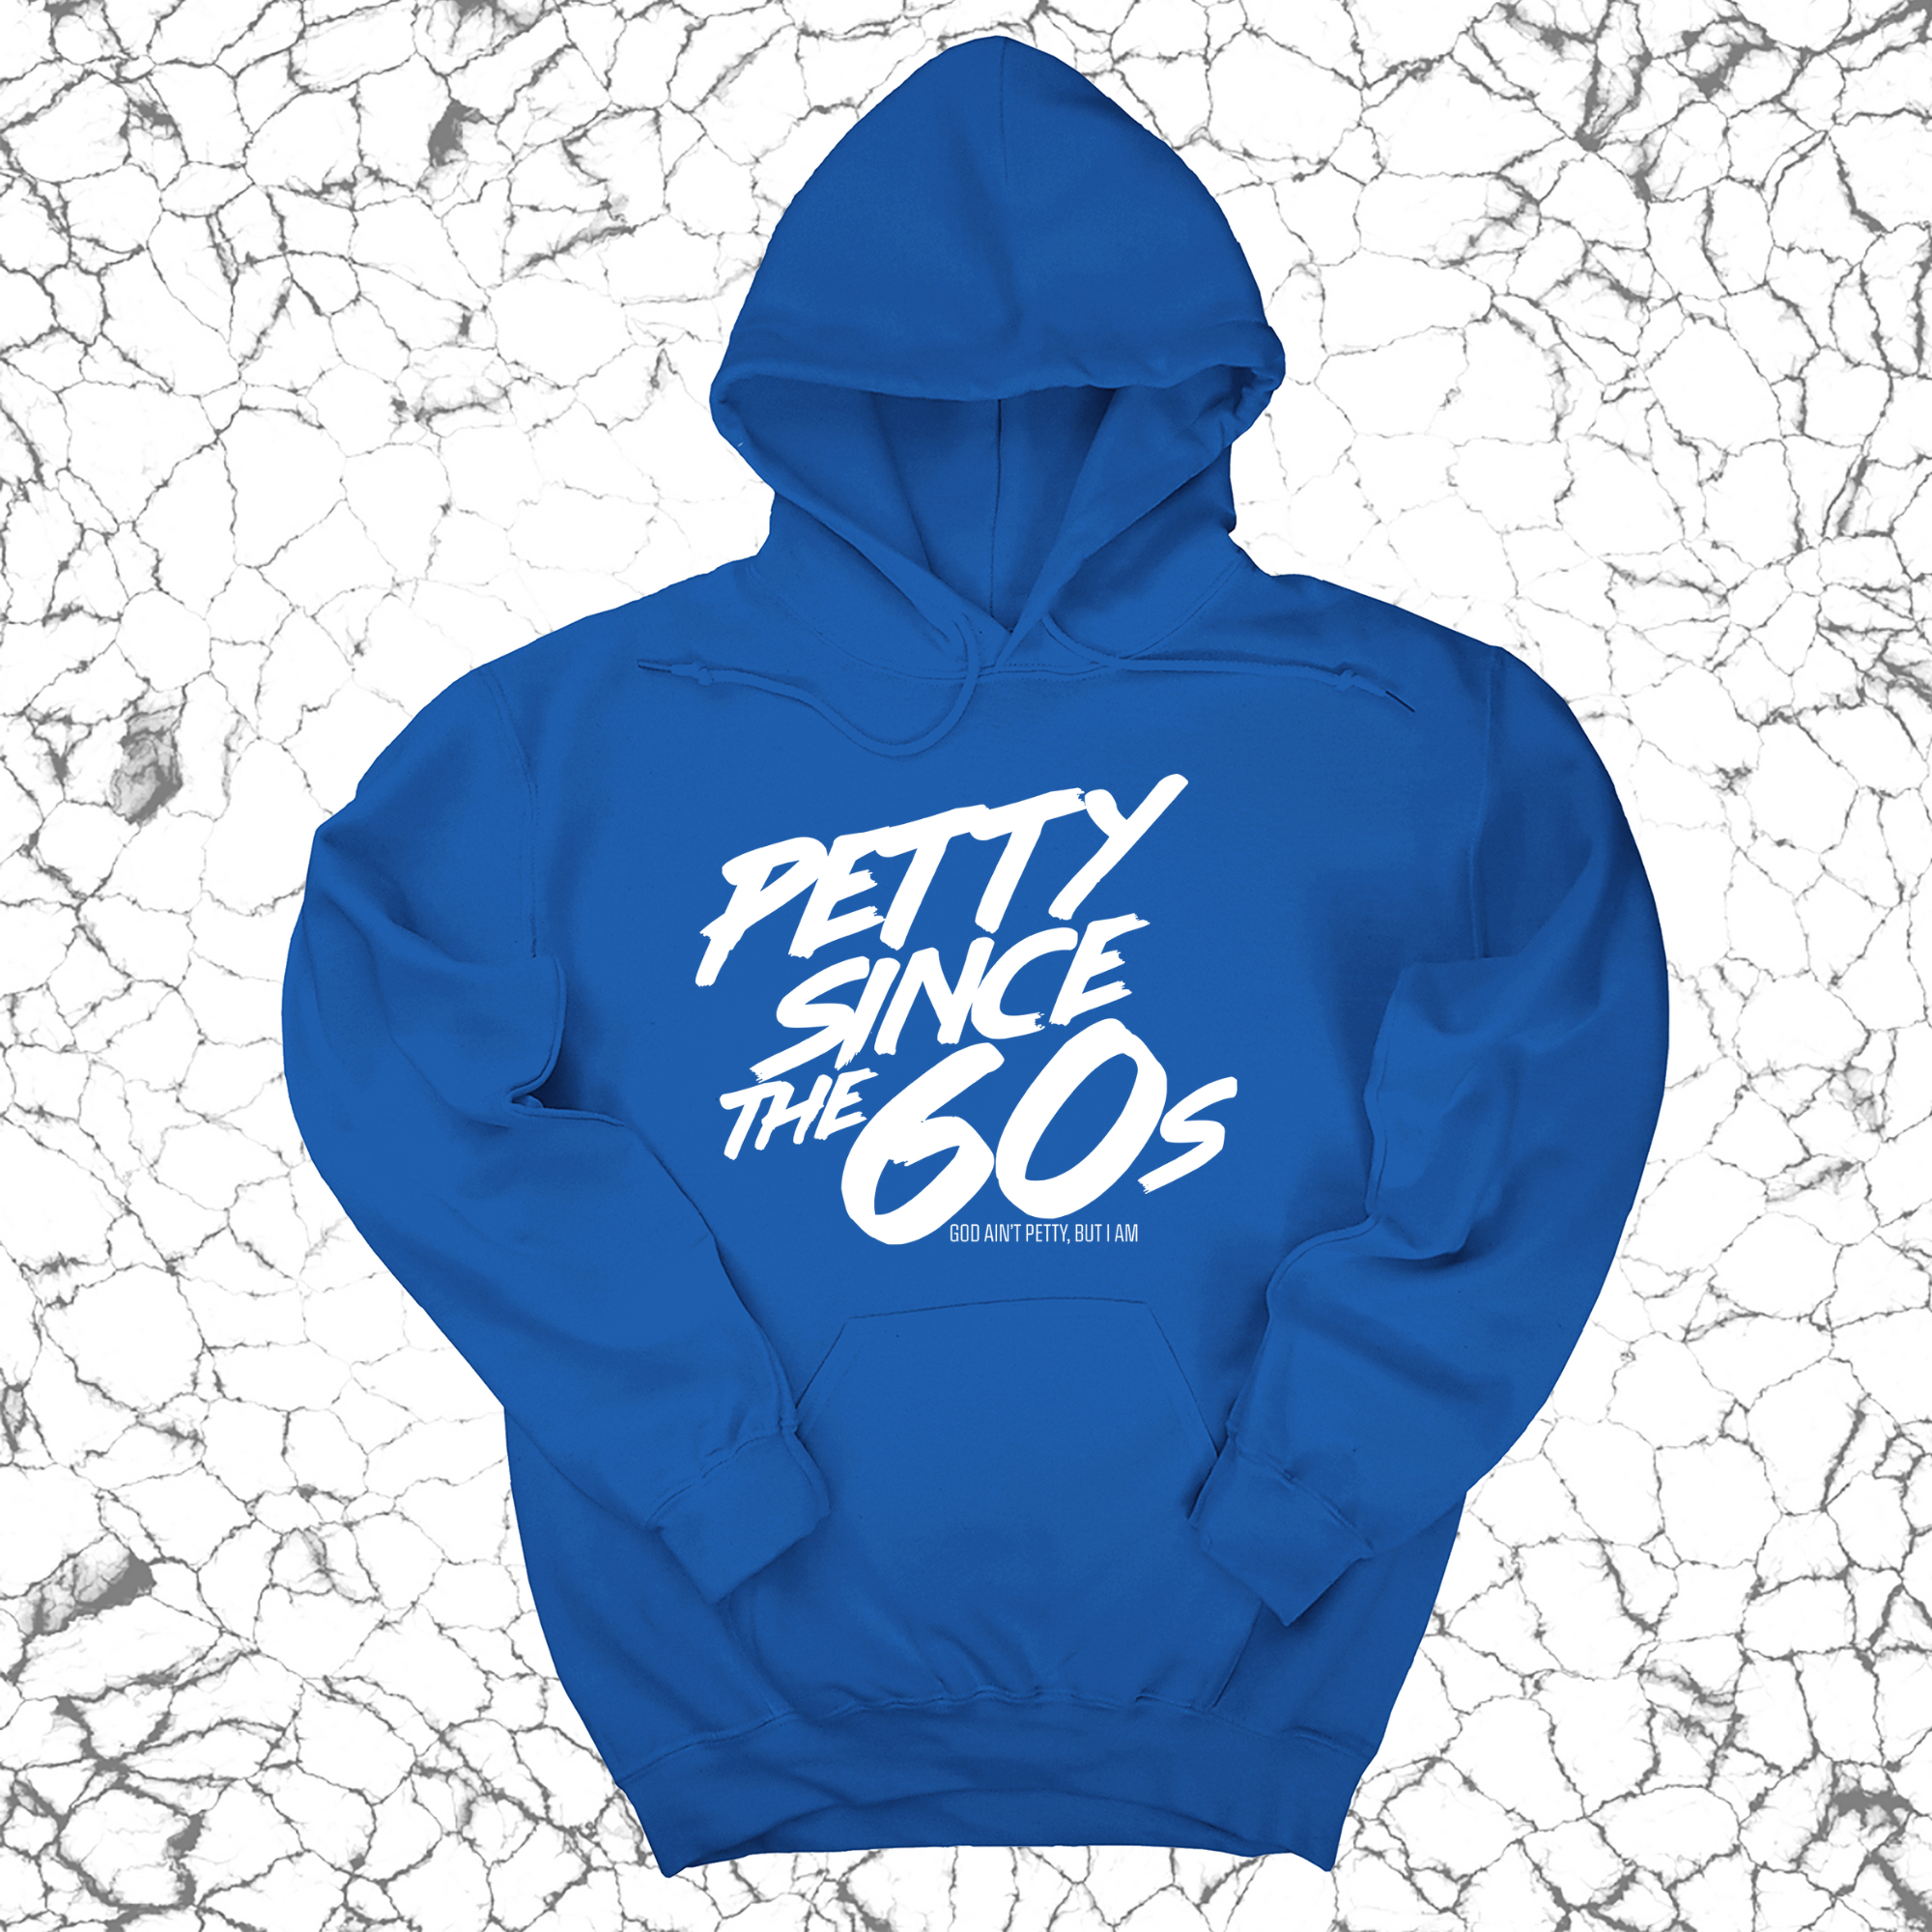 Petty Since the 60s Unisex Hoodies-Hoodie-The Original God Ain't Petty But I Am